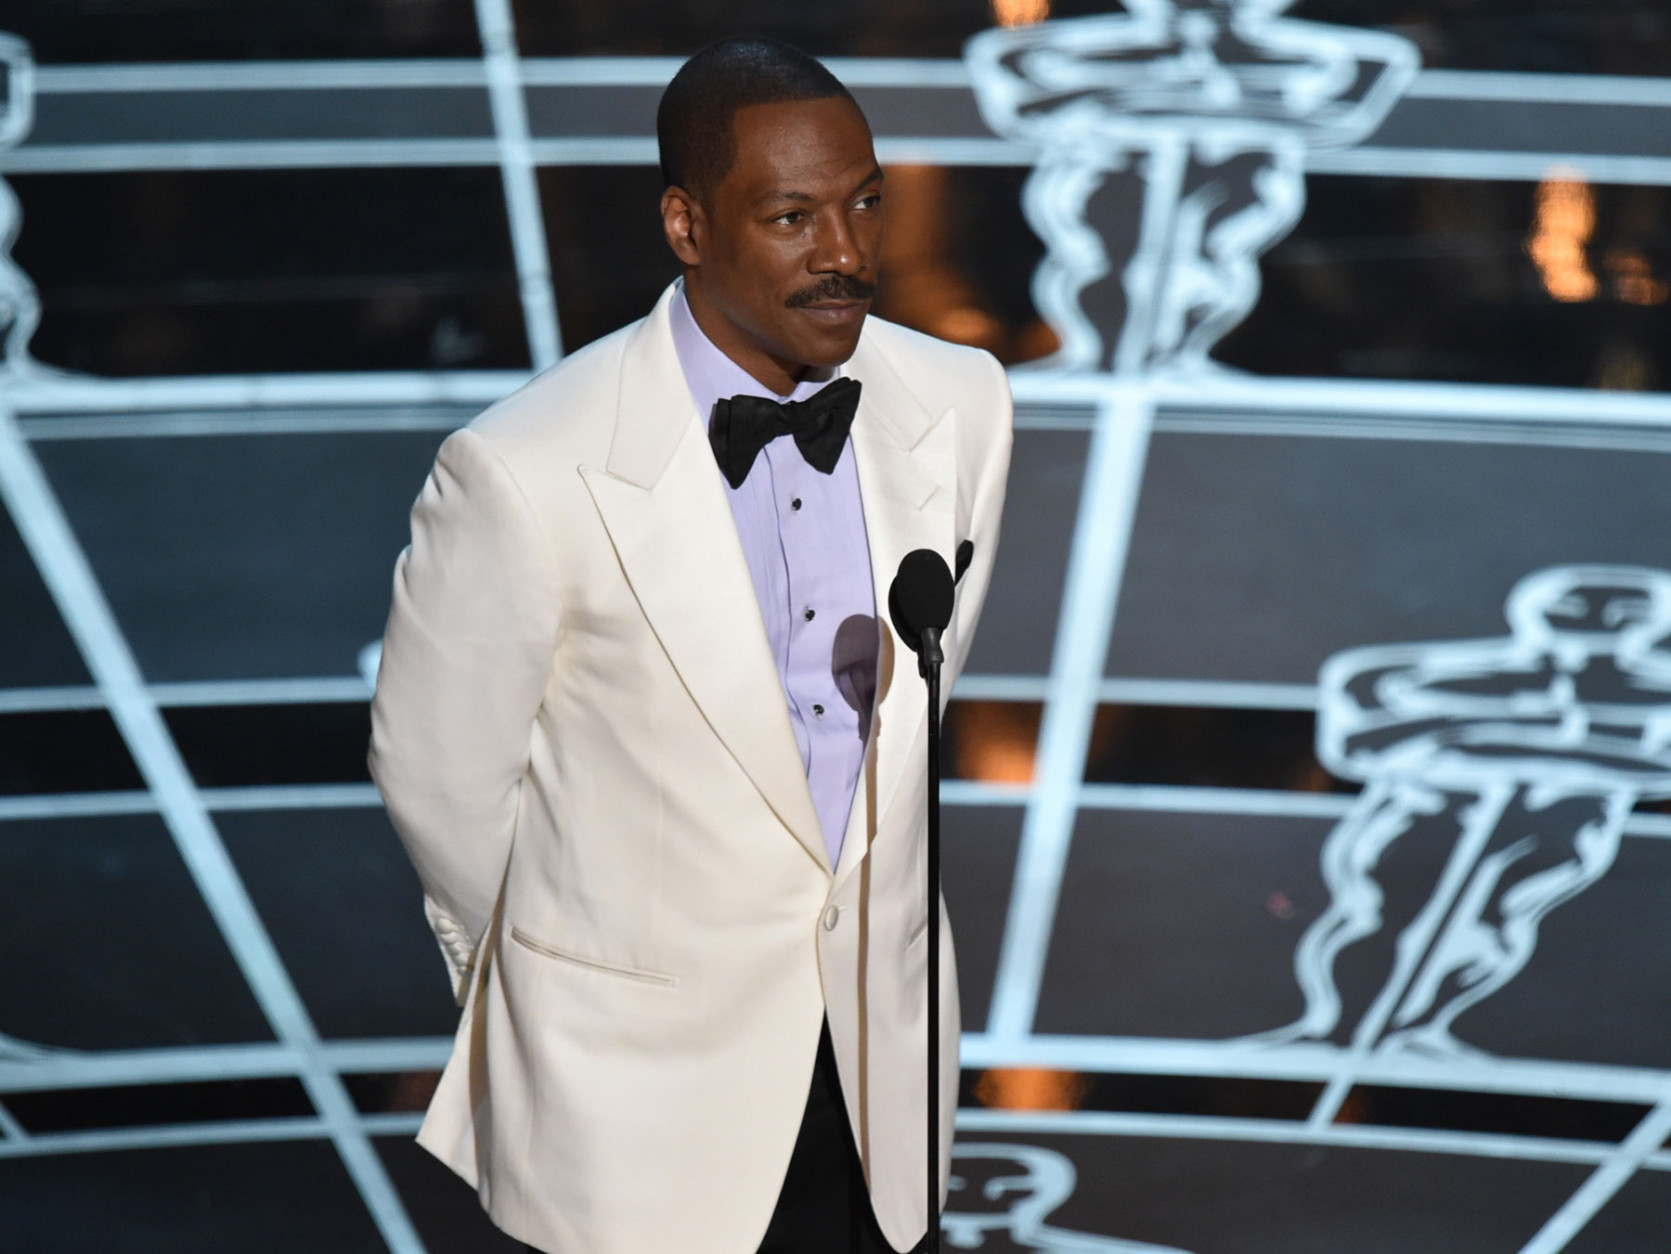 Eddie Murphy presents the award for best original screenplay at the Oscars on Sunday, Feb. 22, 2015, at the Dolby Theatre in Los Angeles. (Photo by John Shearer/Invision/AP)